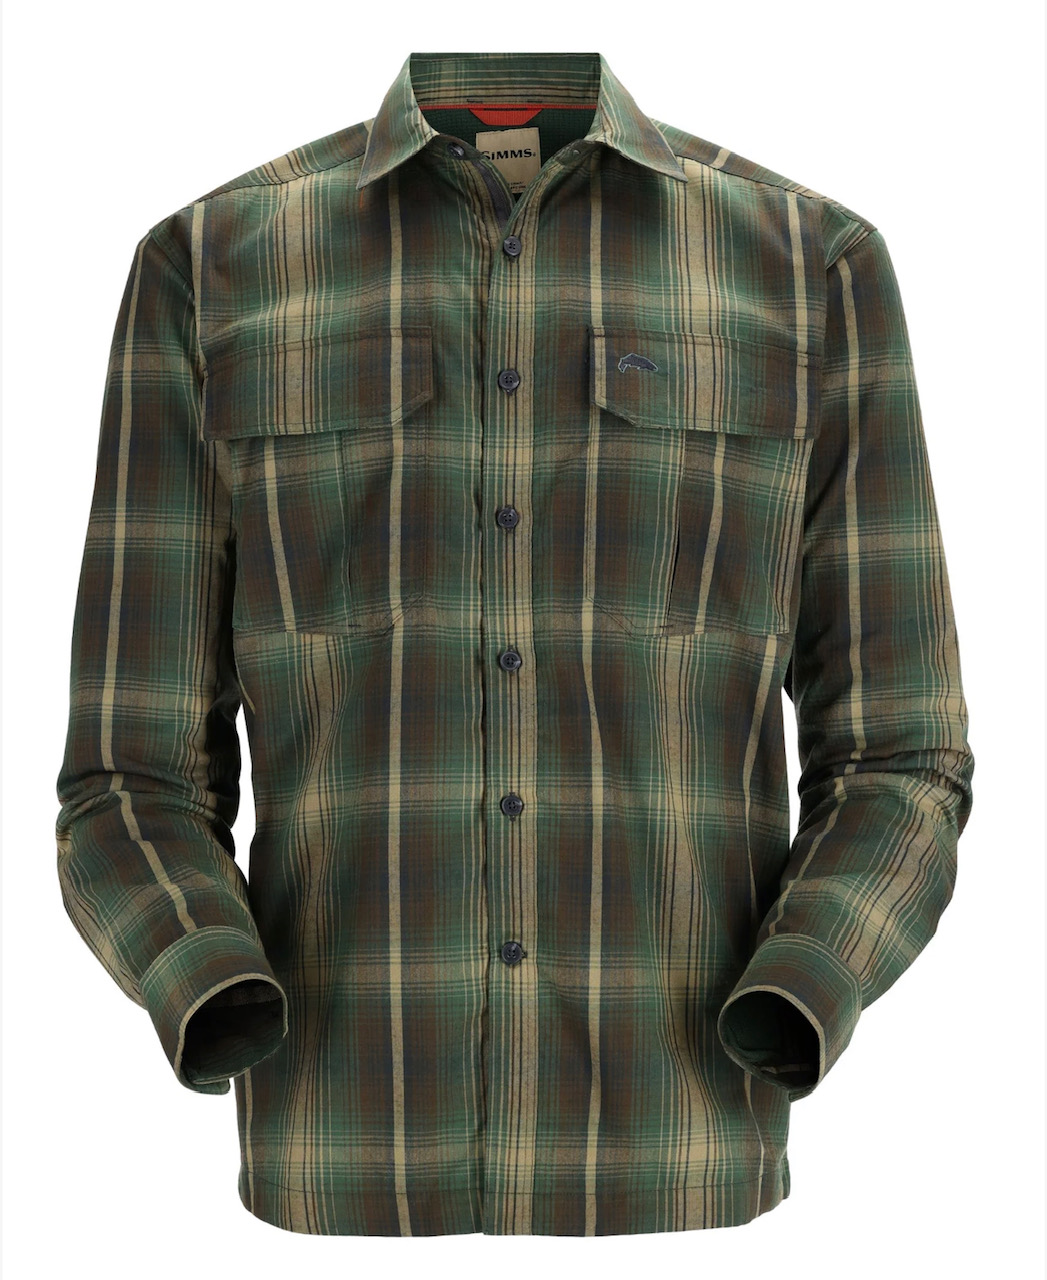 Simms M's Coldweather Shirt - Forest Hickory Plaid - Large